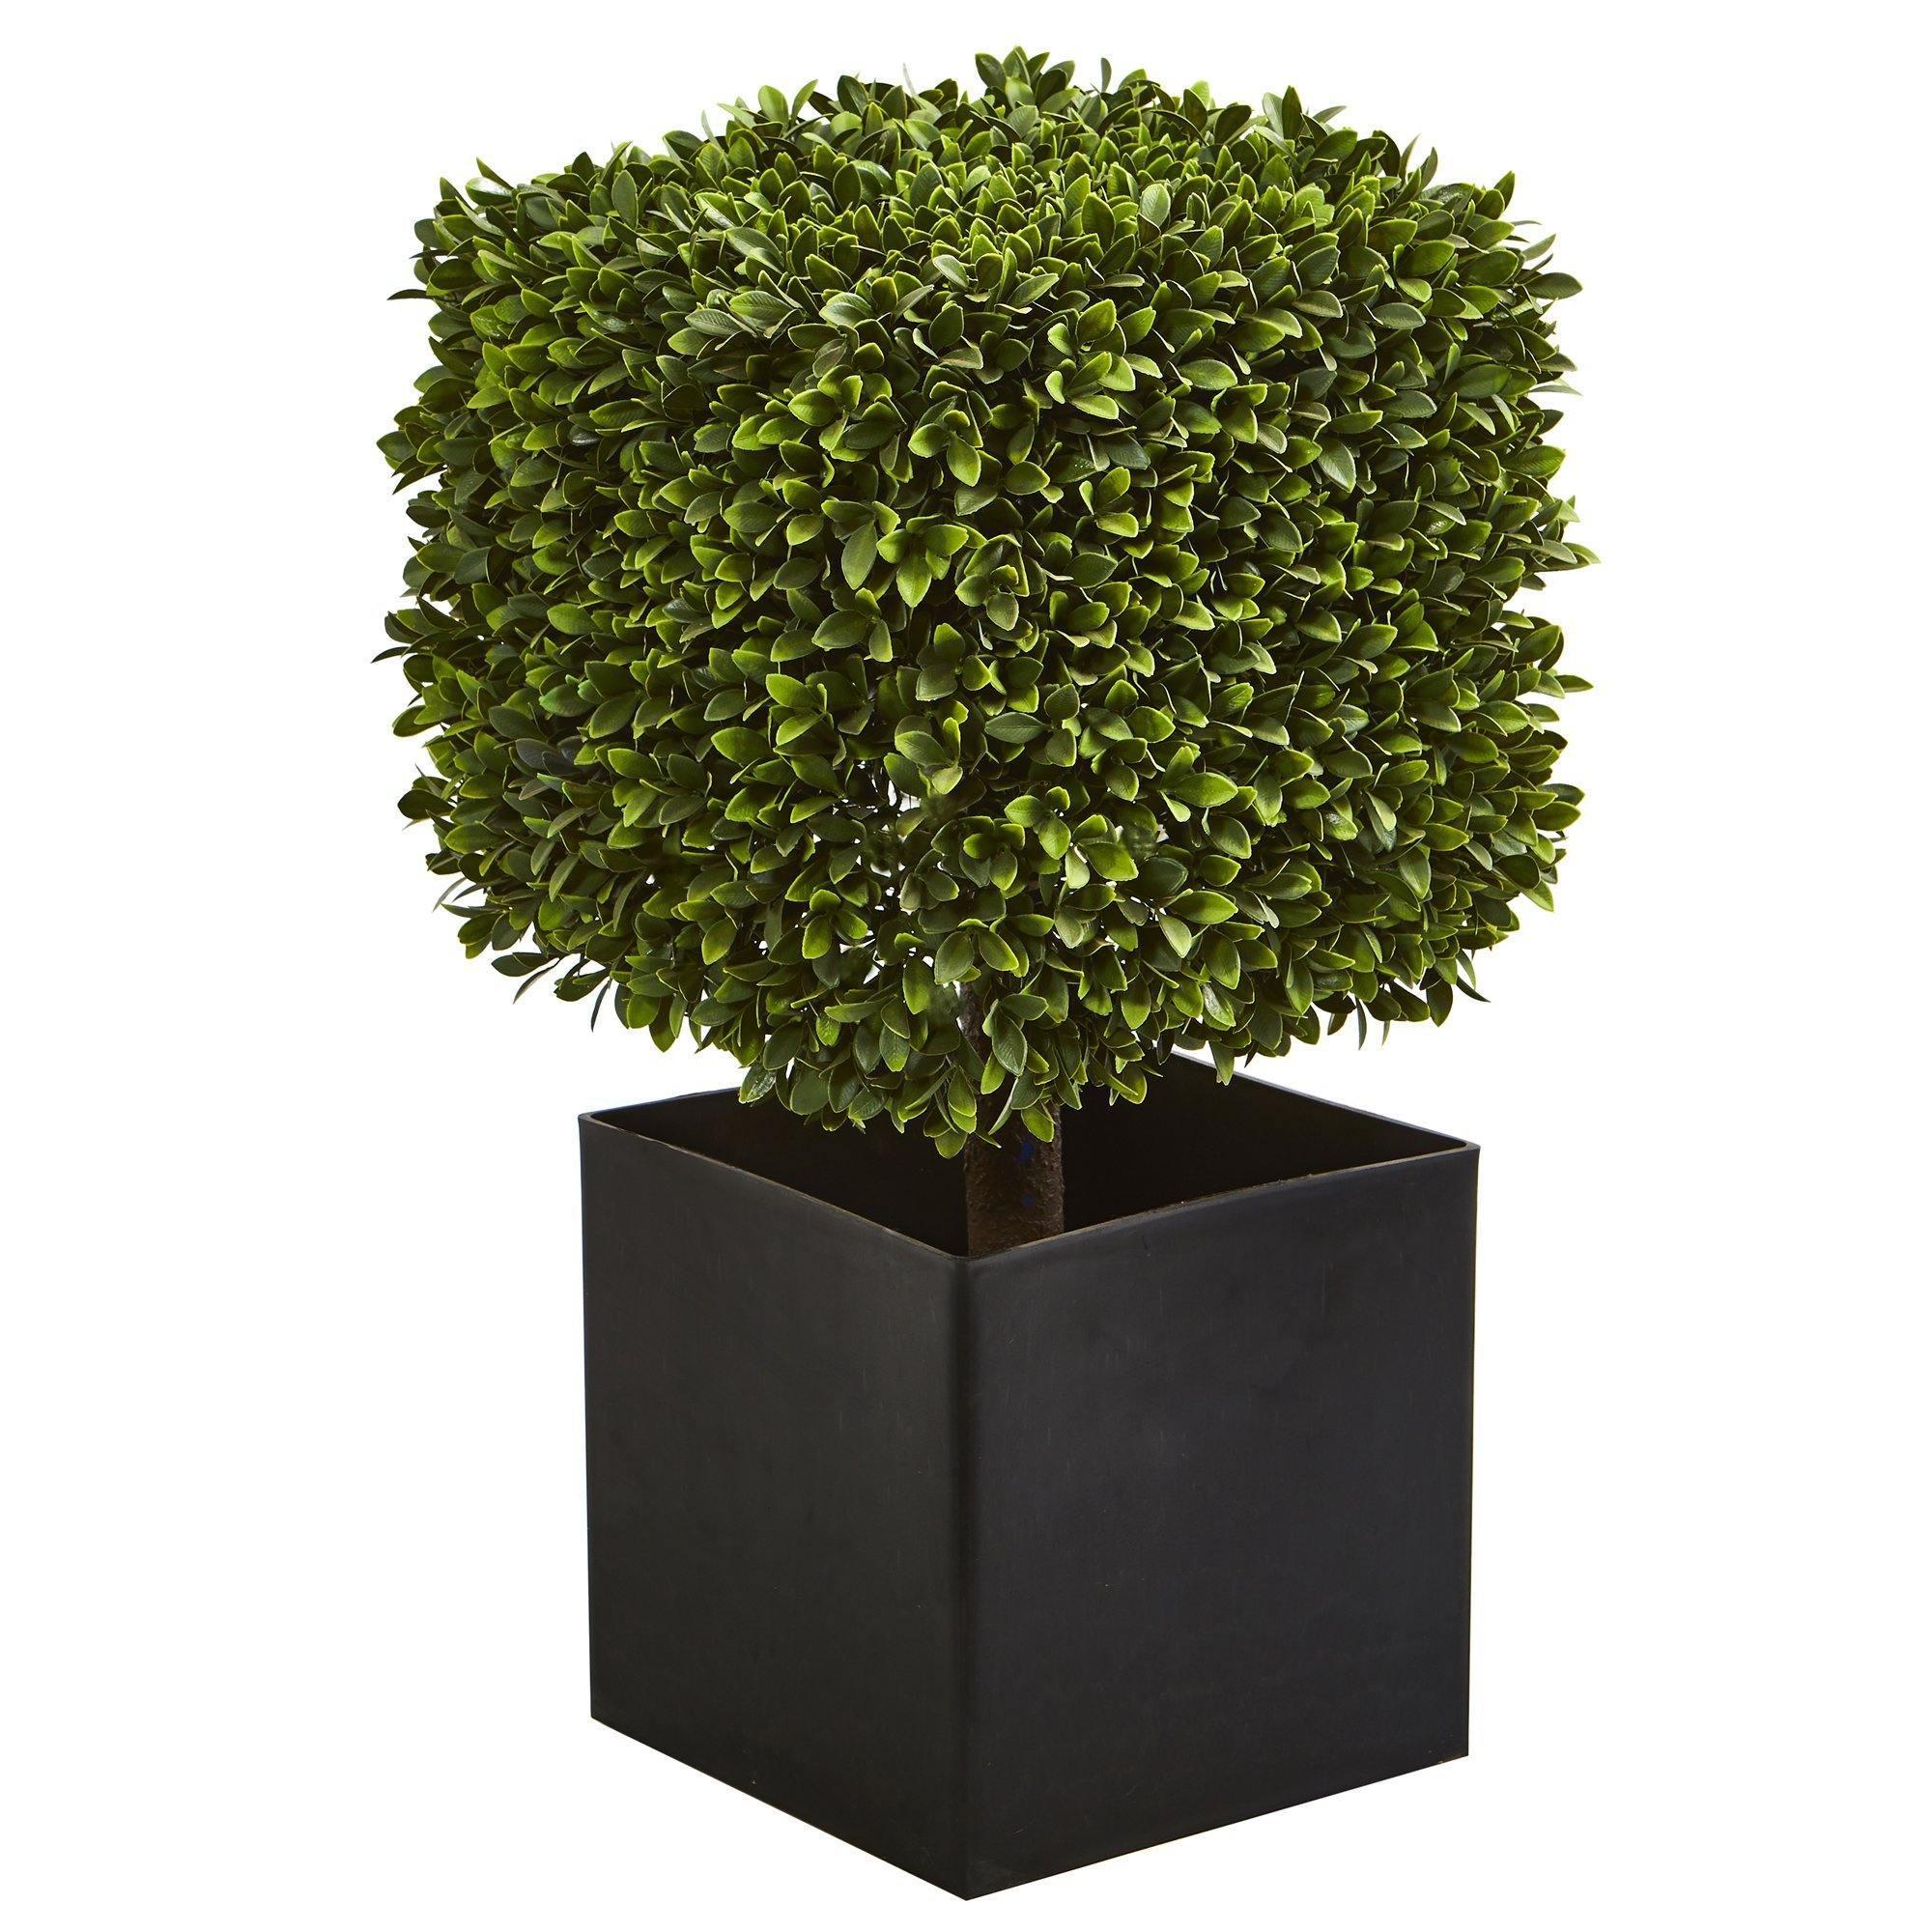 38” Olive Topiary Artificial Tree in Bowl Planter UV Resistant  (Indoor/Outdoor) 